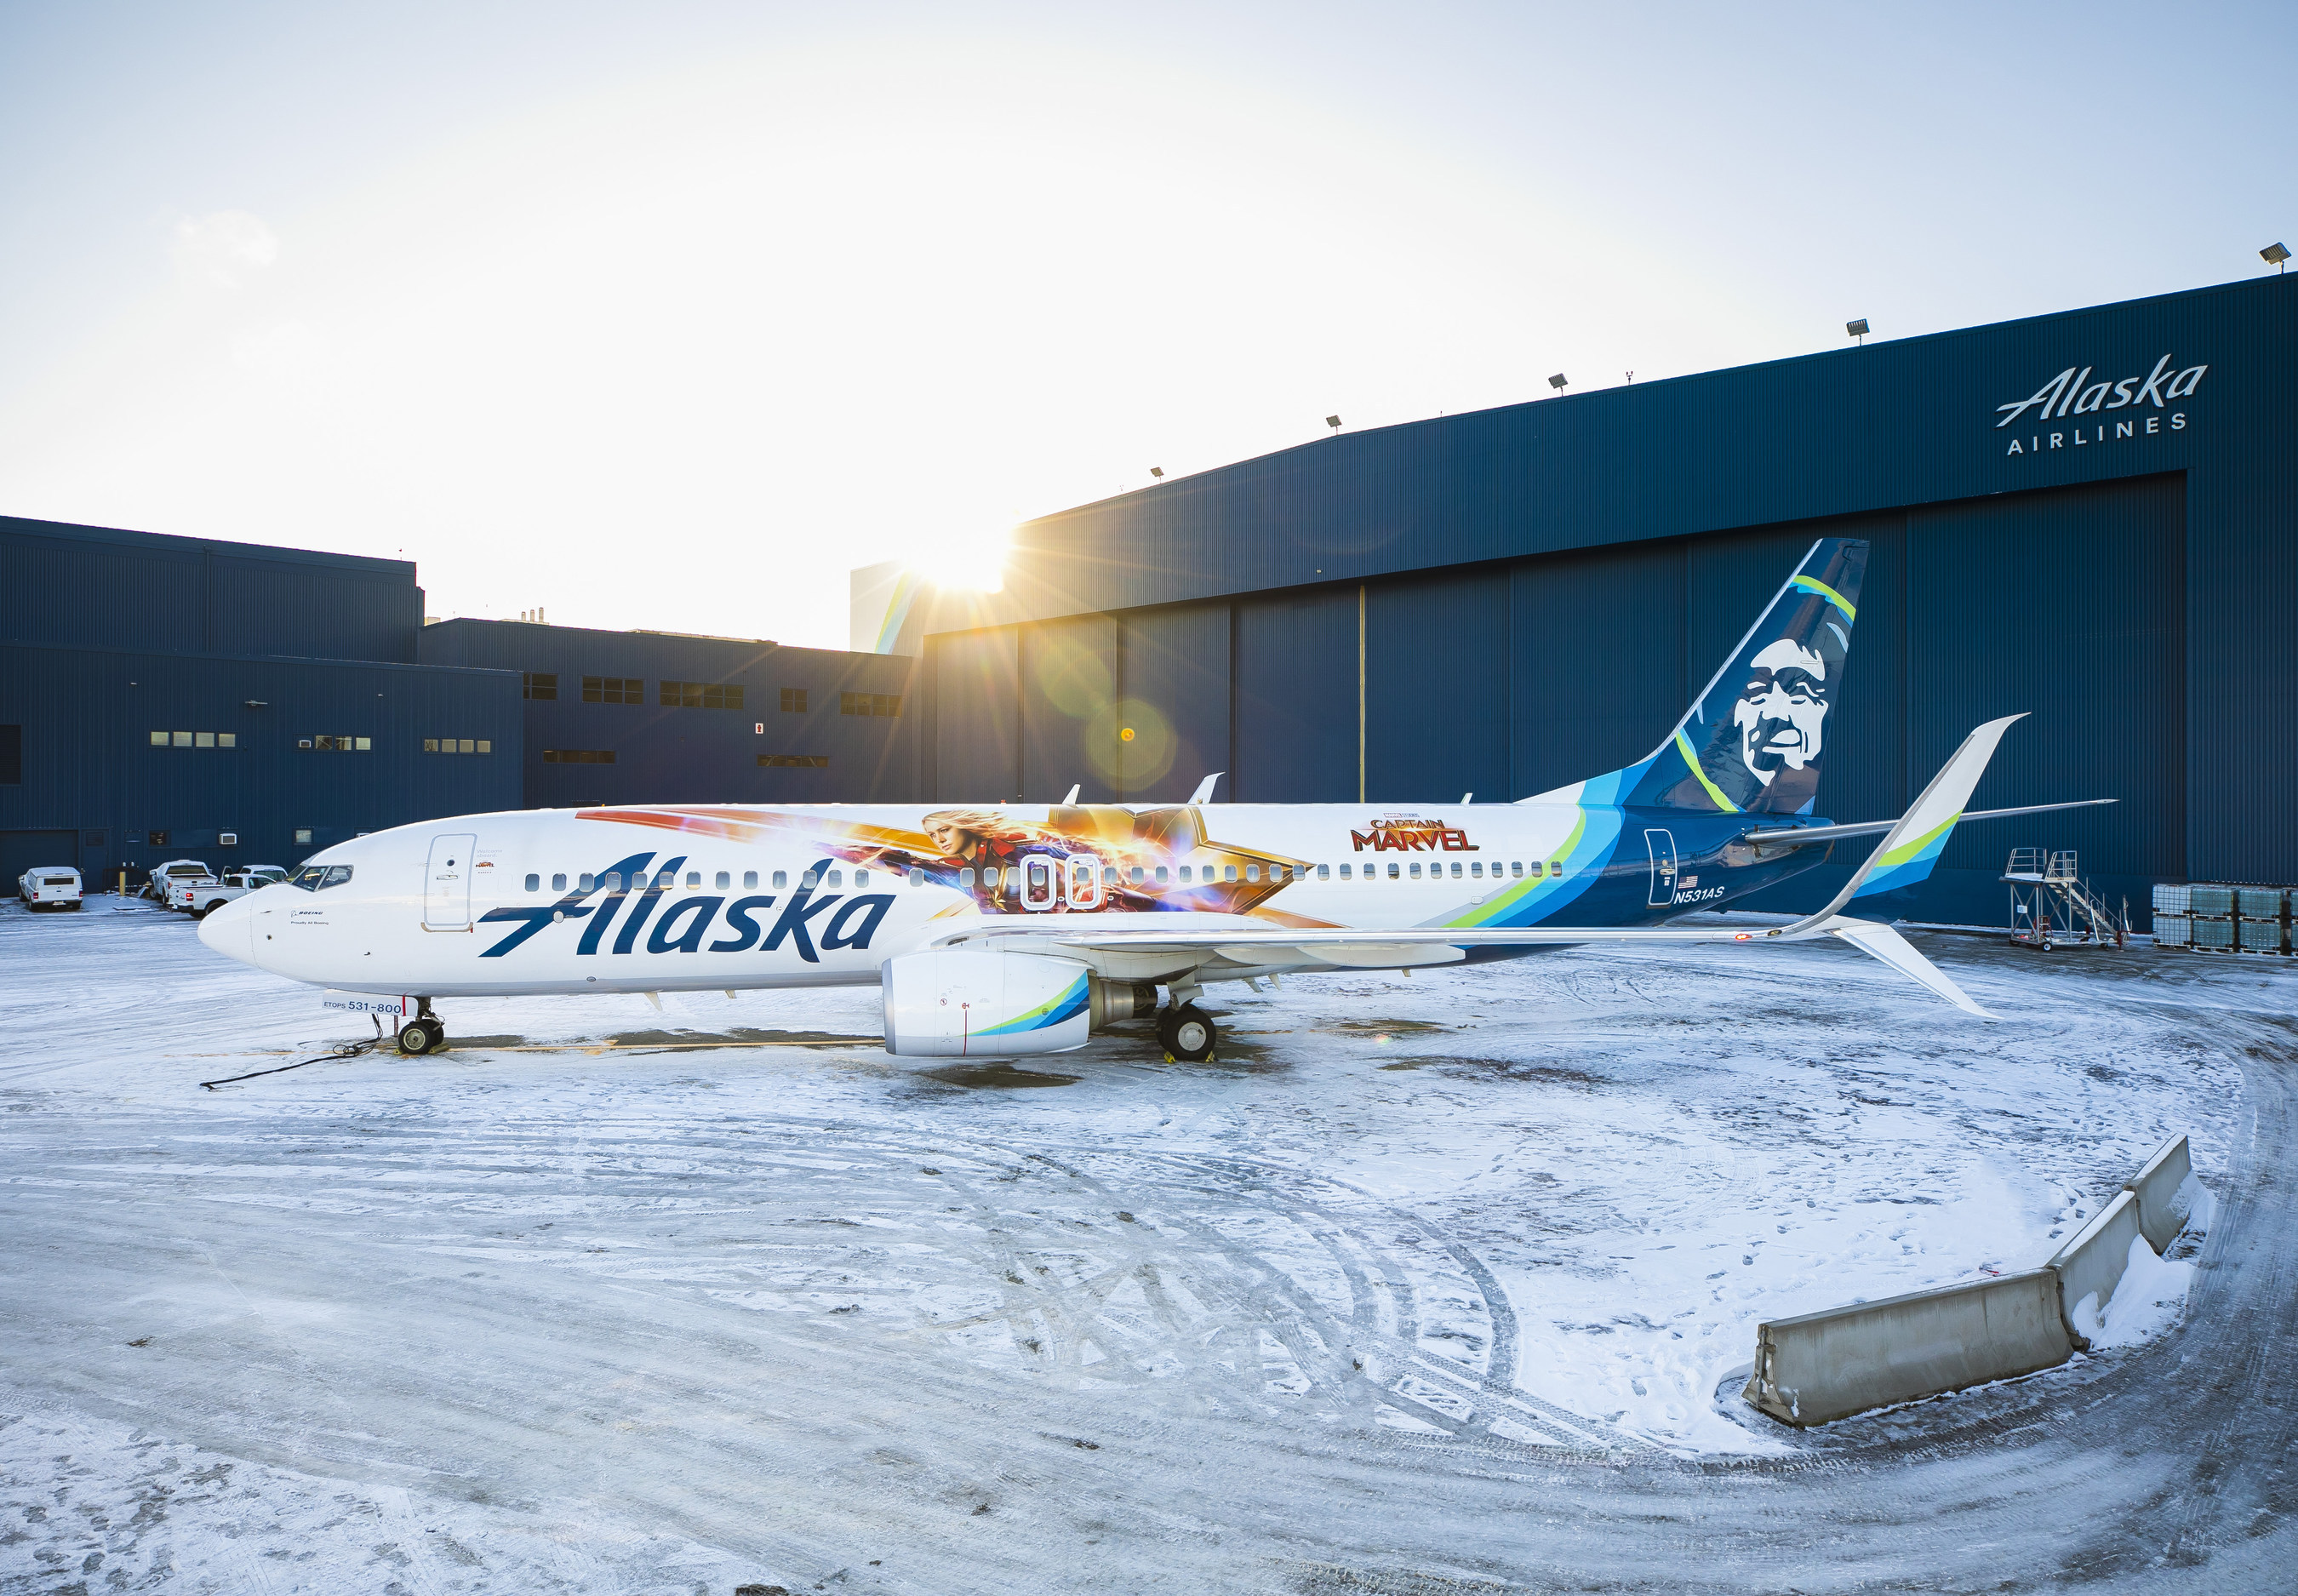 Captain Marvel Takes Flight With Alaska Airlines